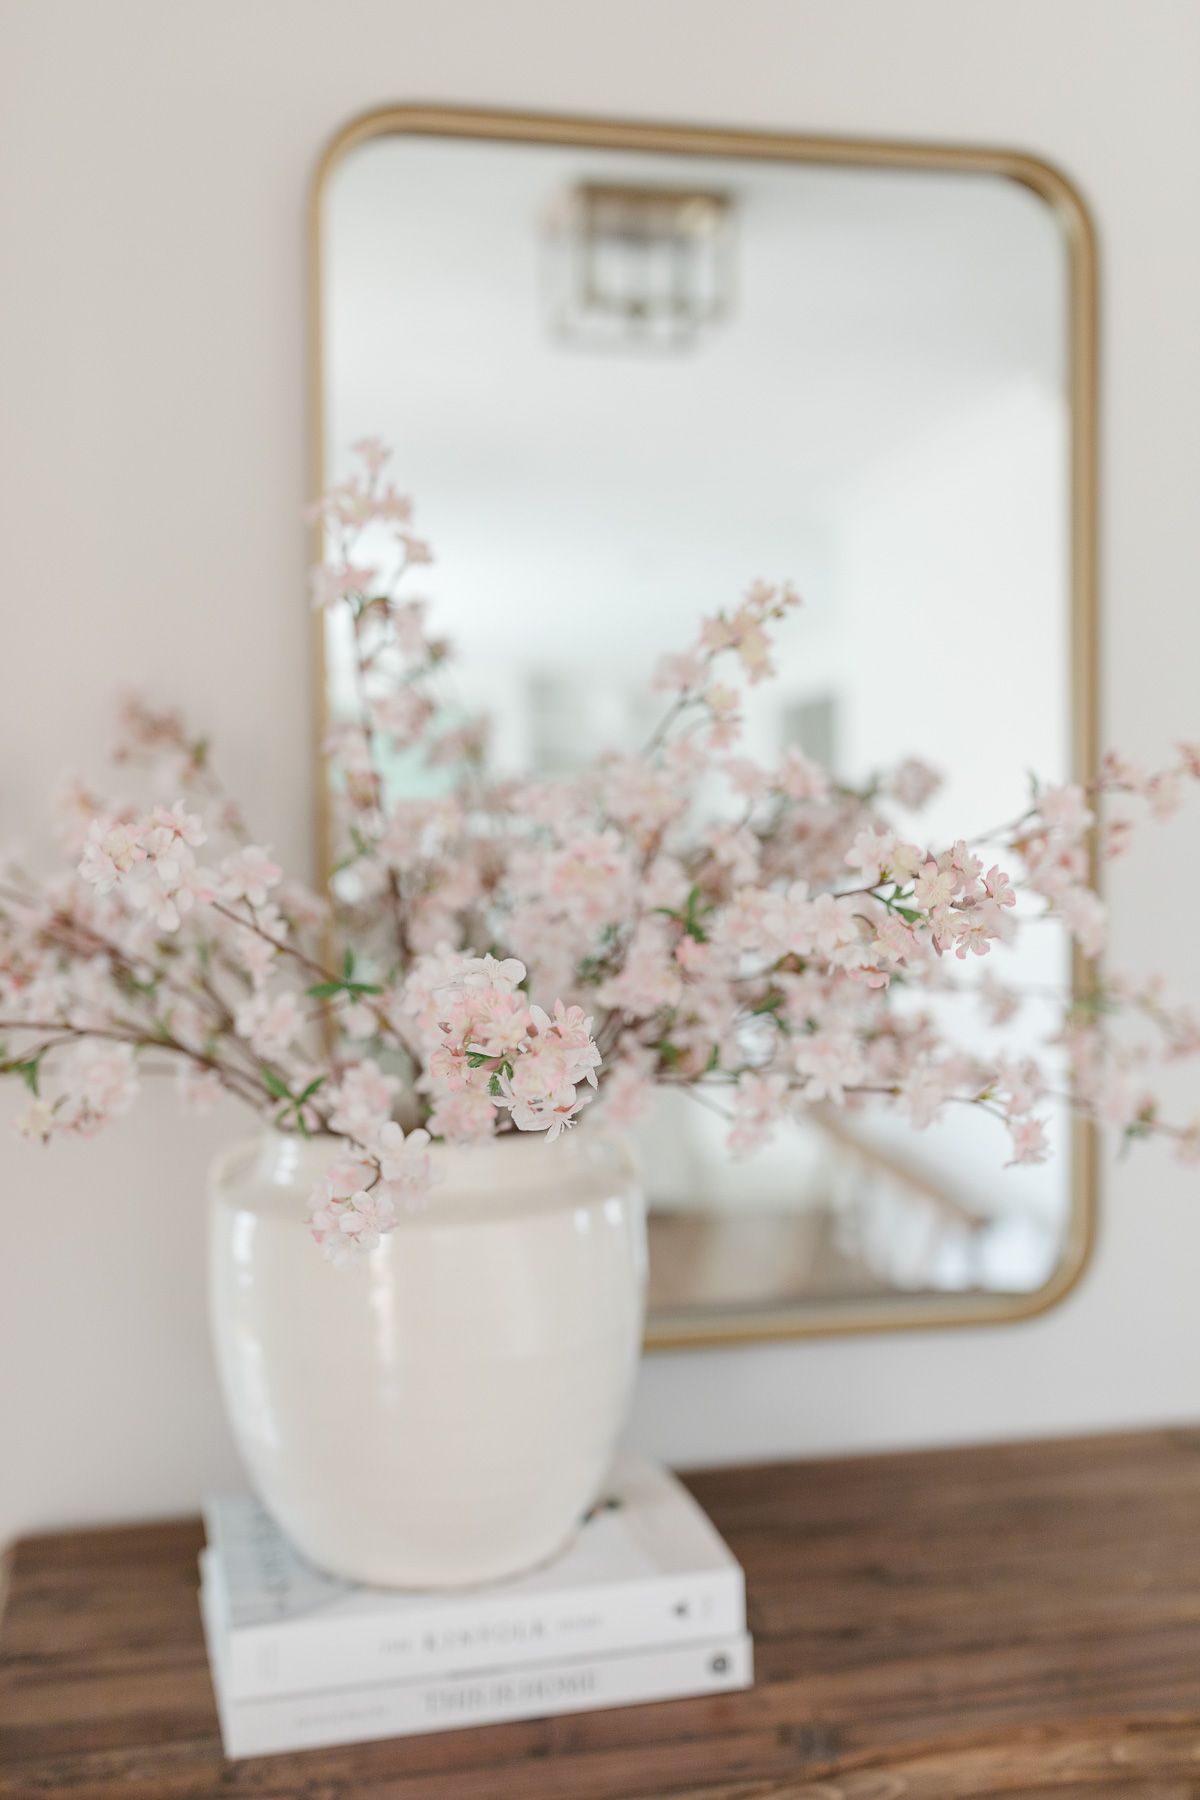 Faux flowers in a white vase in front of a gold mirror